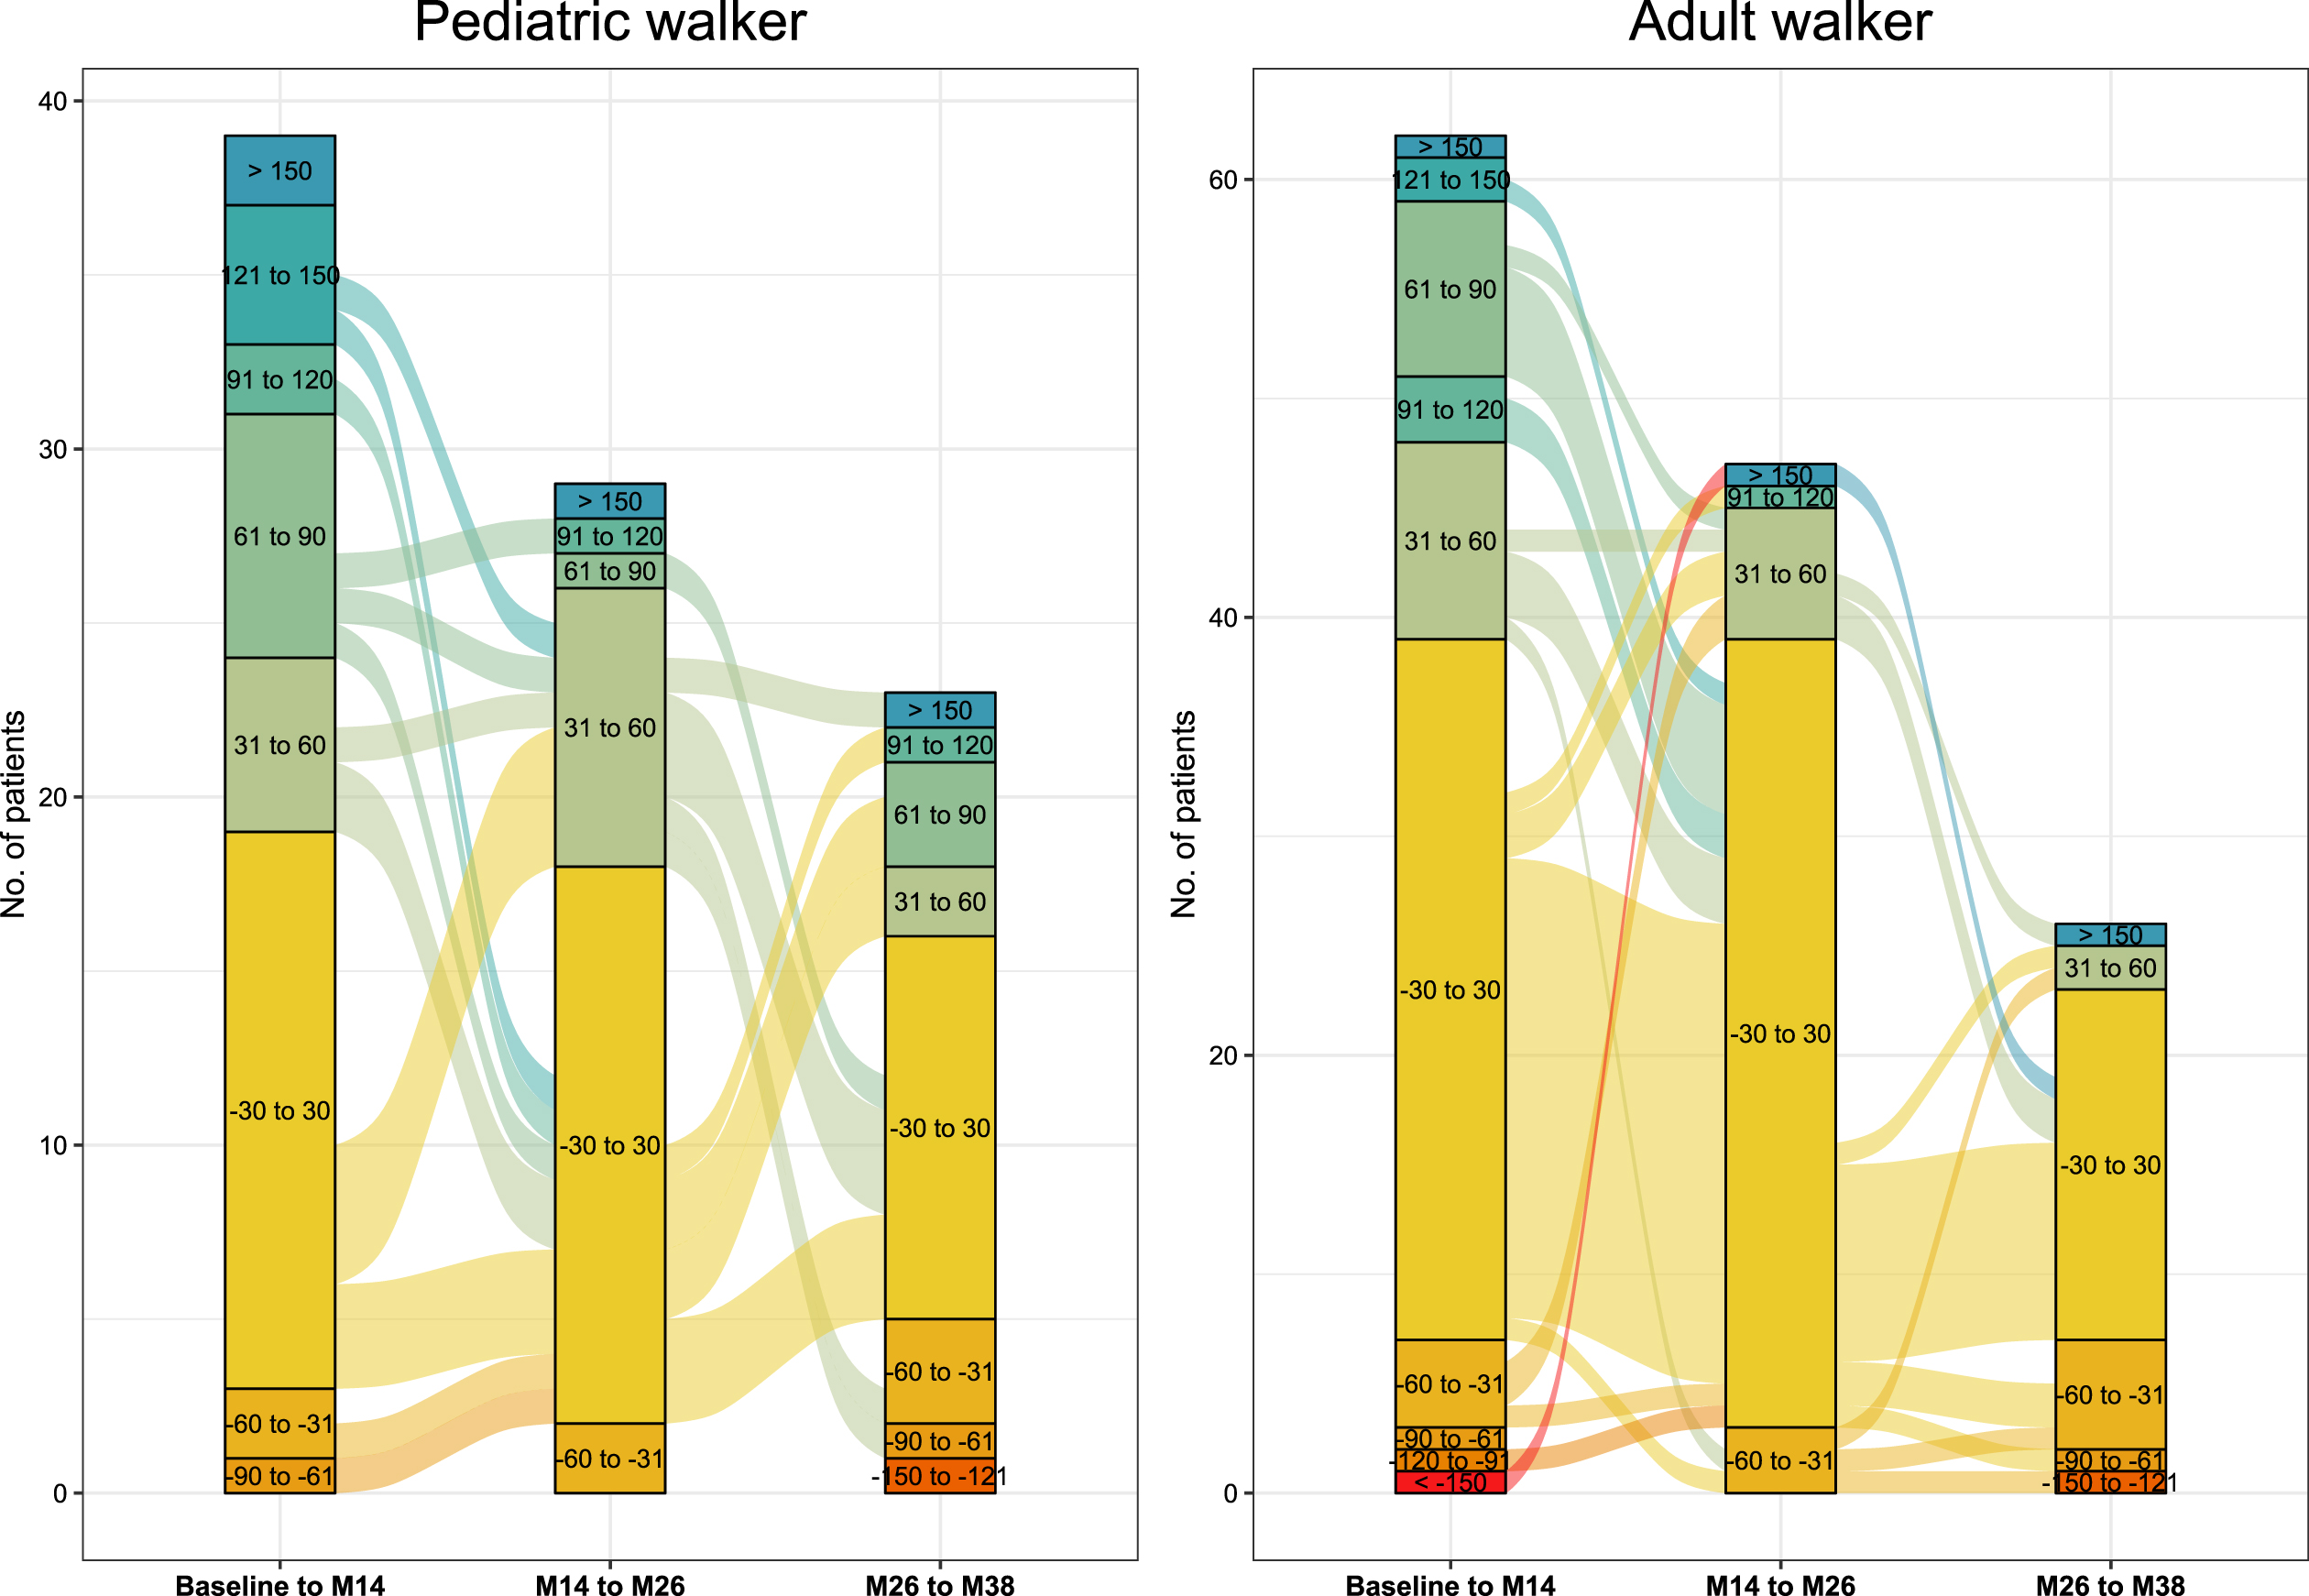 Responder analysis 6MWT. Responder analysis for pediatric walkers and adult walkers. Colors indicate response groups according to changes in 6MWT per time-period (baseline-m14, m14-m26, m26-m38). Lines between columns indicate the progression of patients over time with improvements or worsening in walking distance.